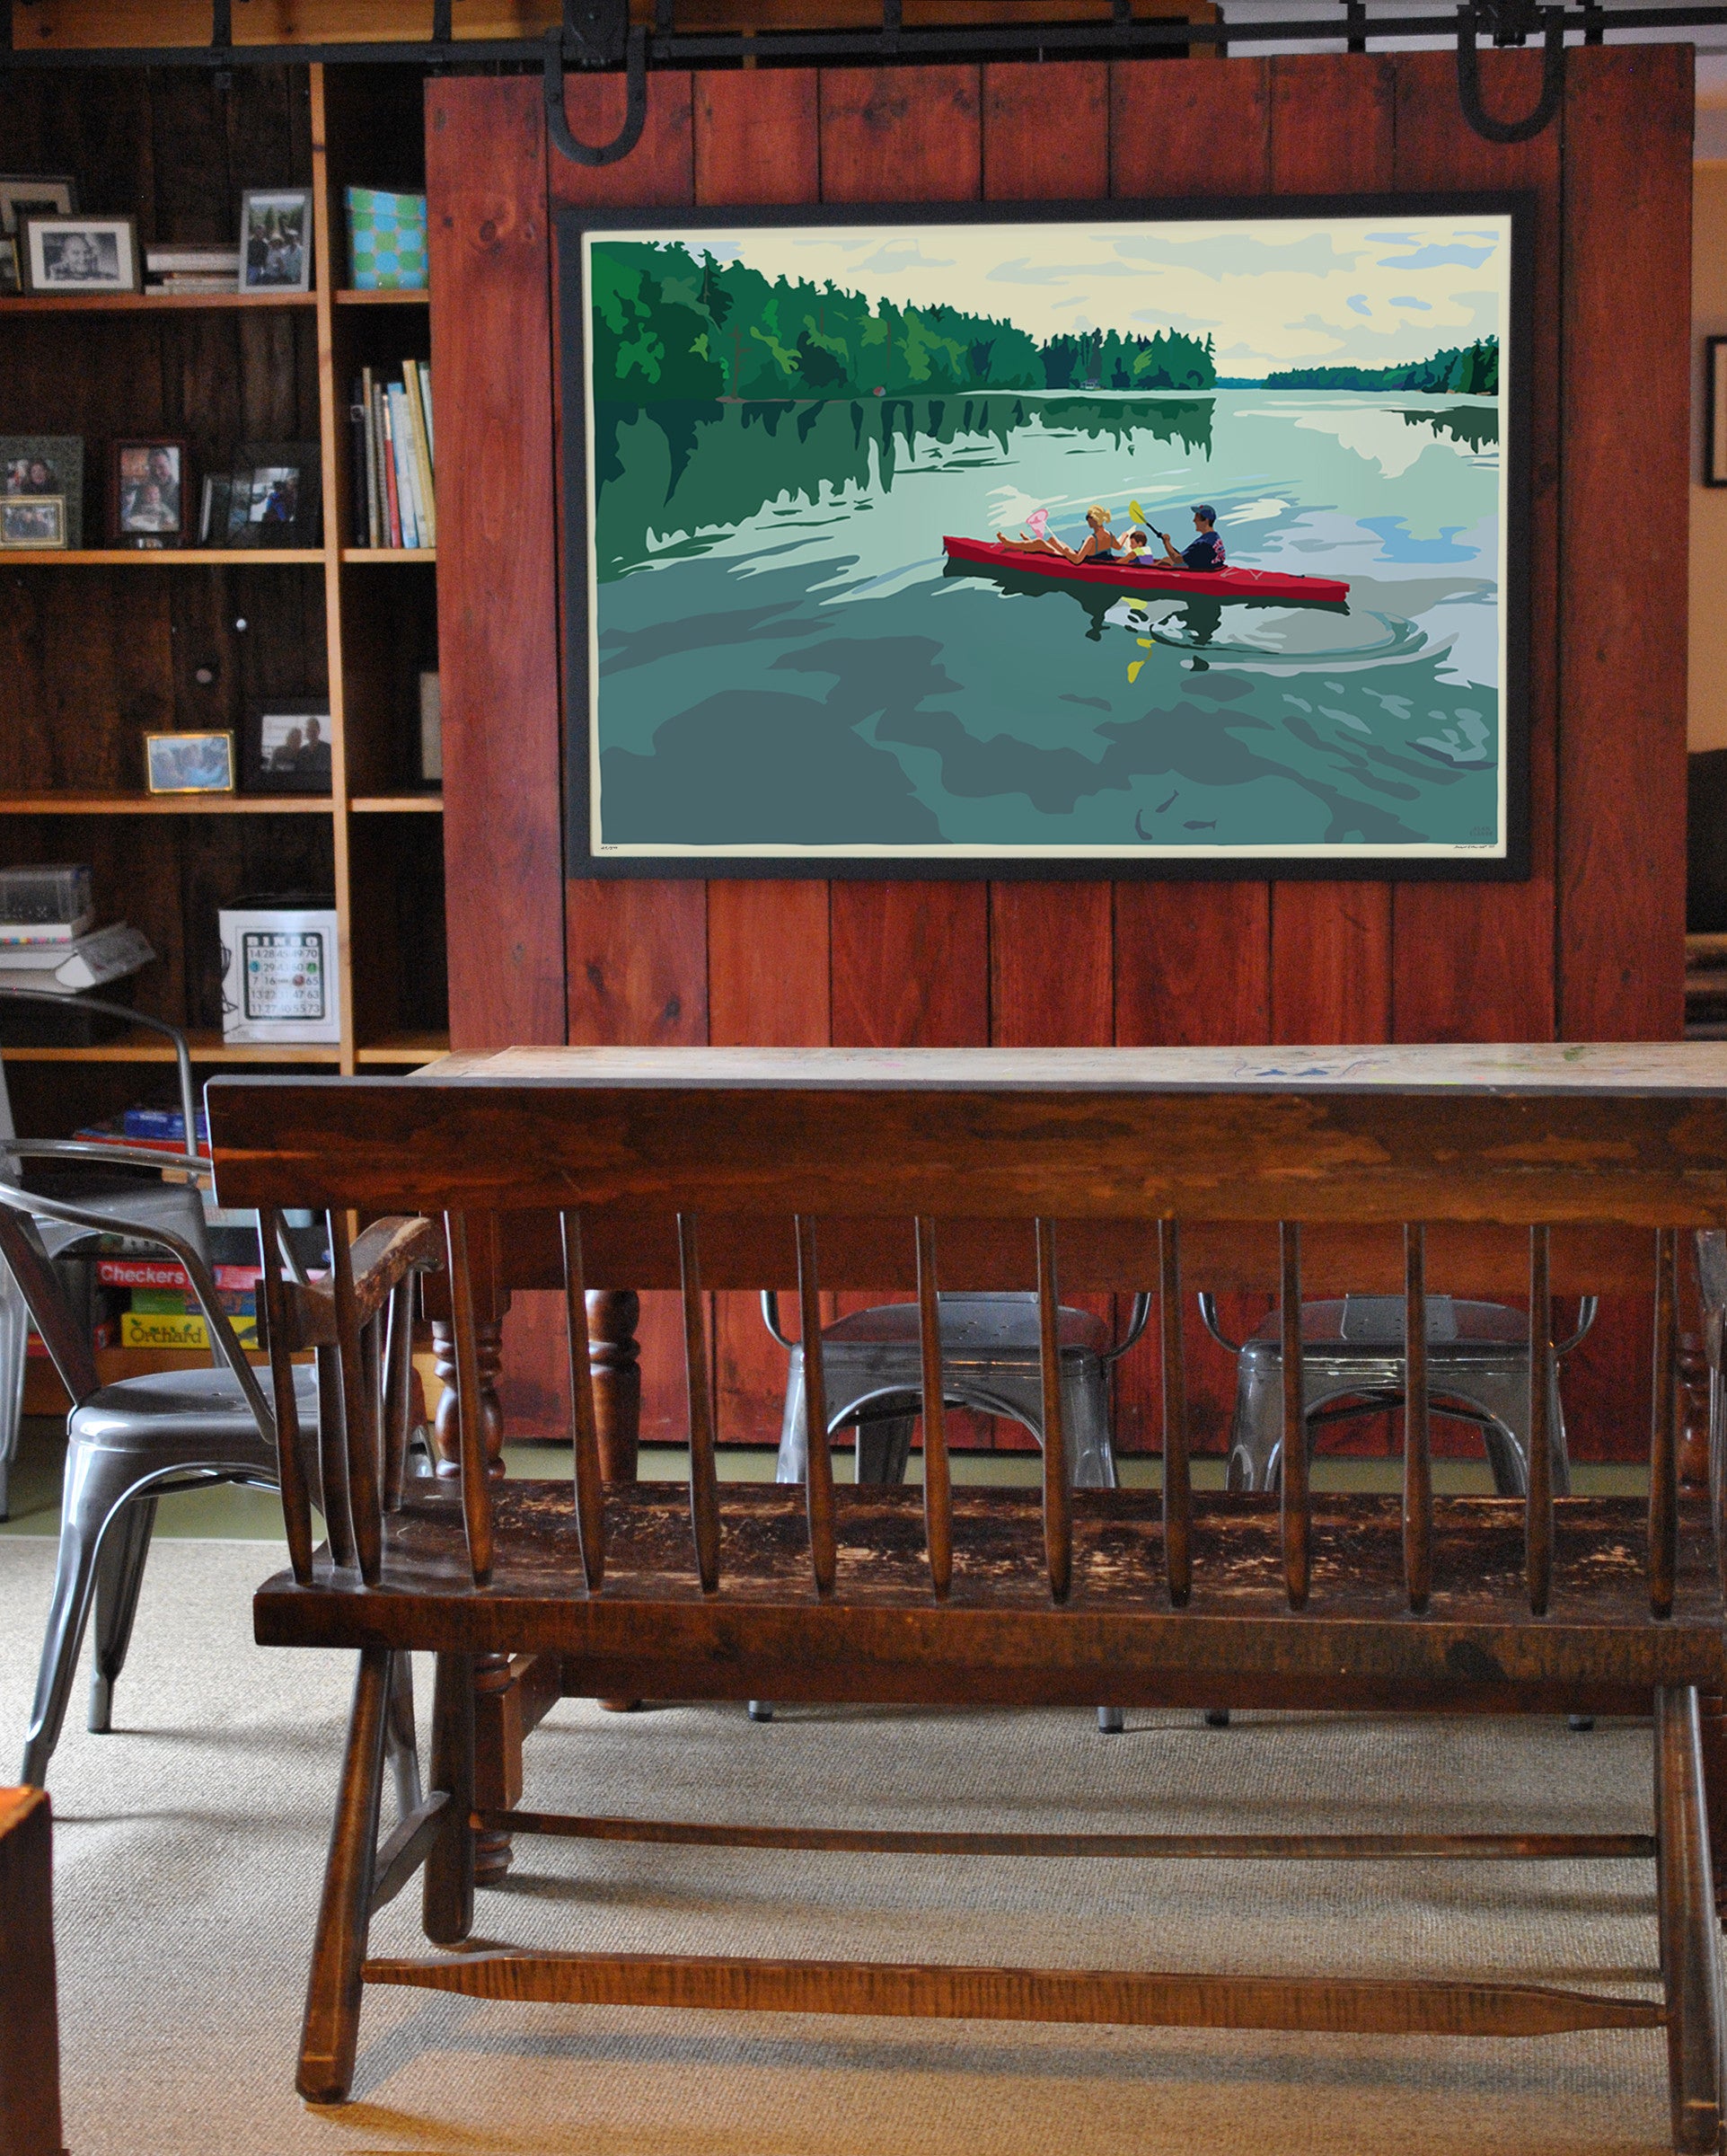 Kayaking On A Lake Art Print 36" x 53" Framed Travel Poster By Alan Claude - Maine